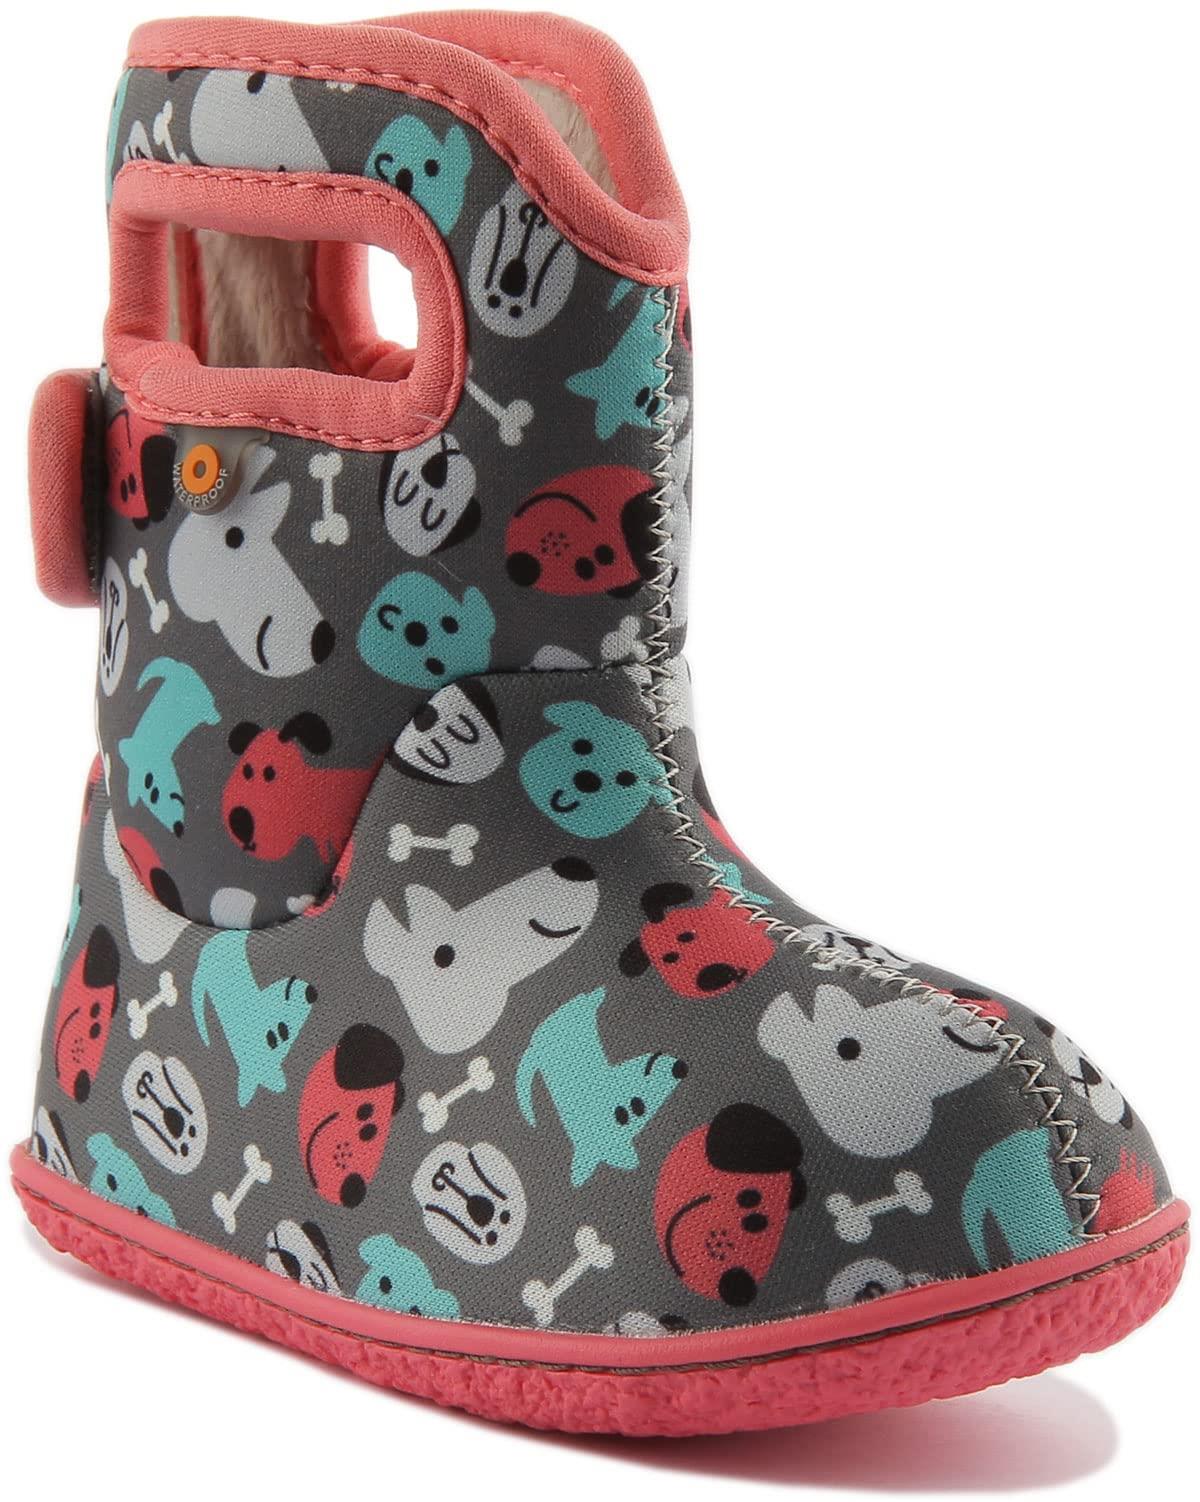 Girls Baby Bogs Grey Puppy Insulated Washable Warm Wellies Boots 72608